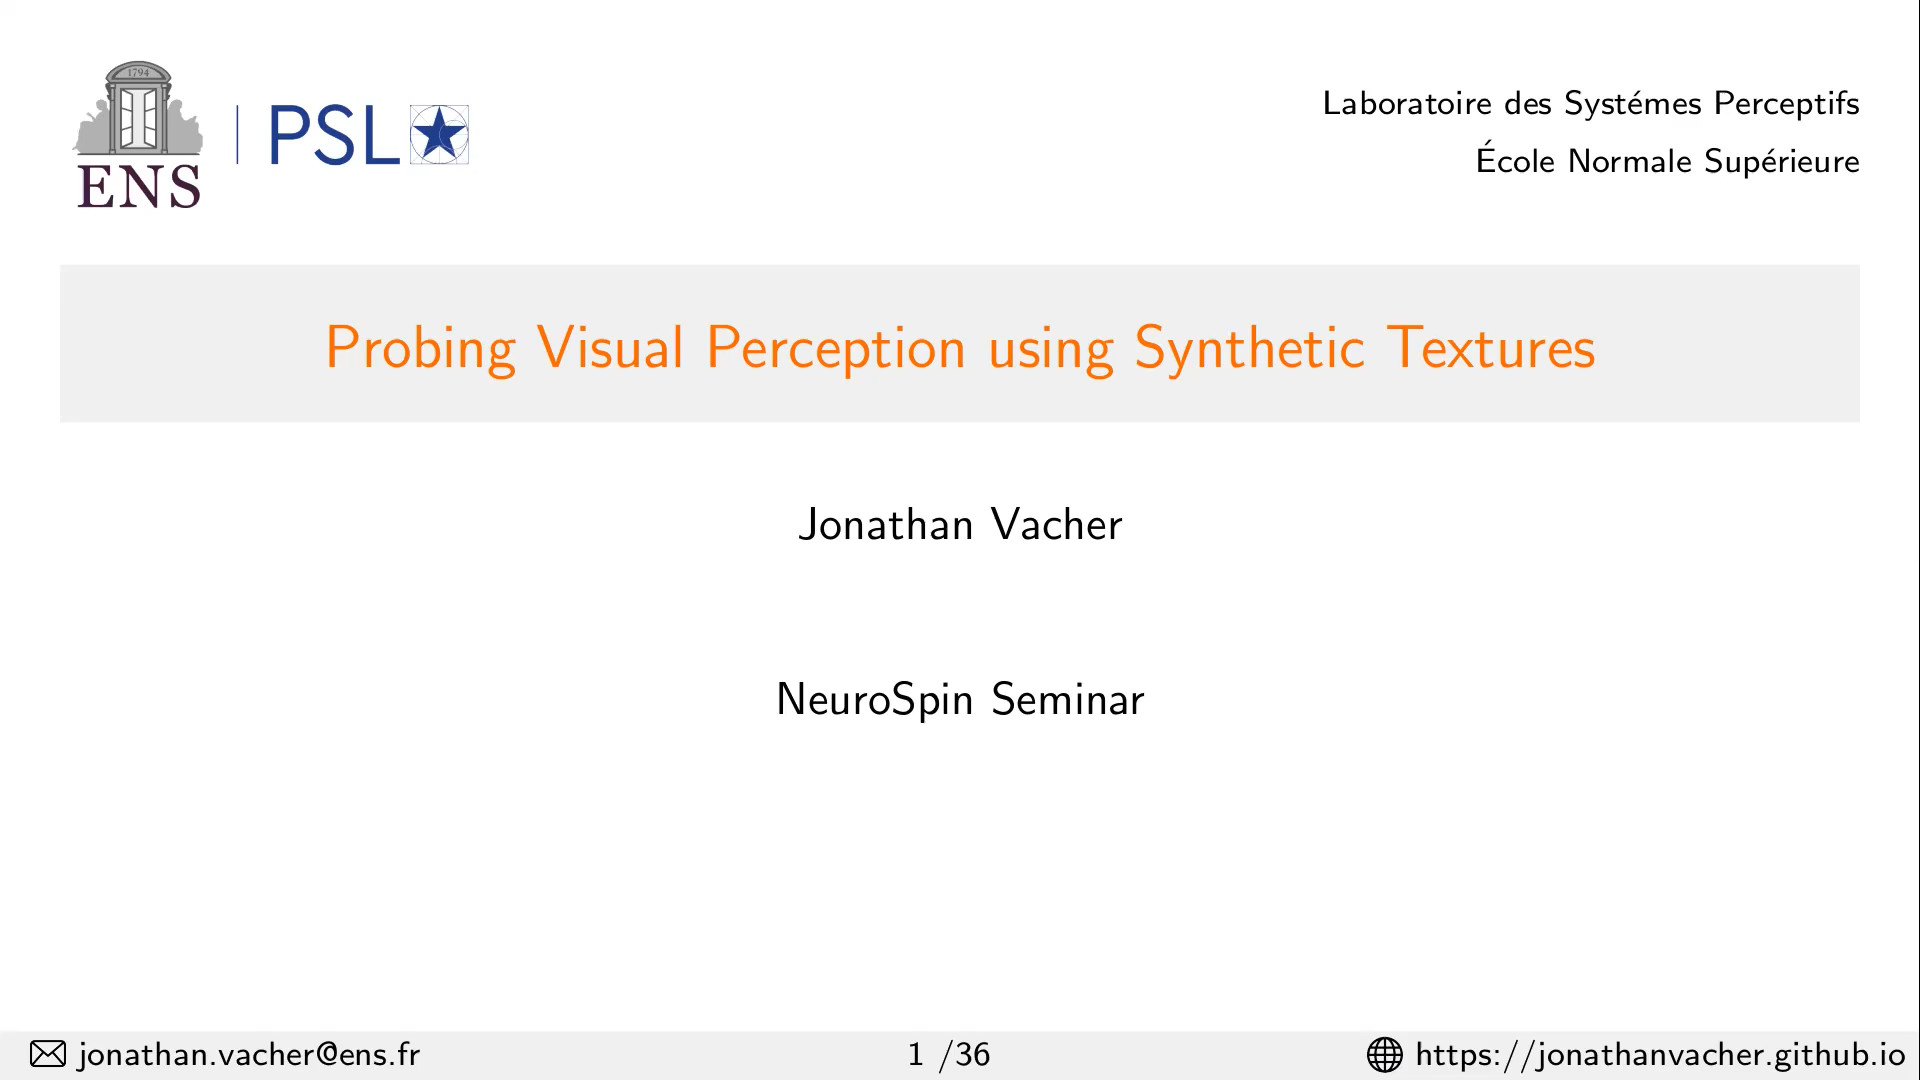 Probing Visual Perception using Synthetic Textures